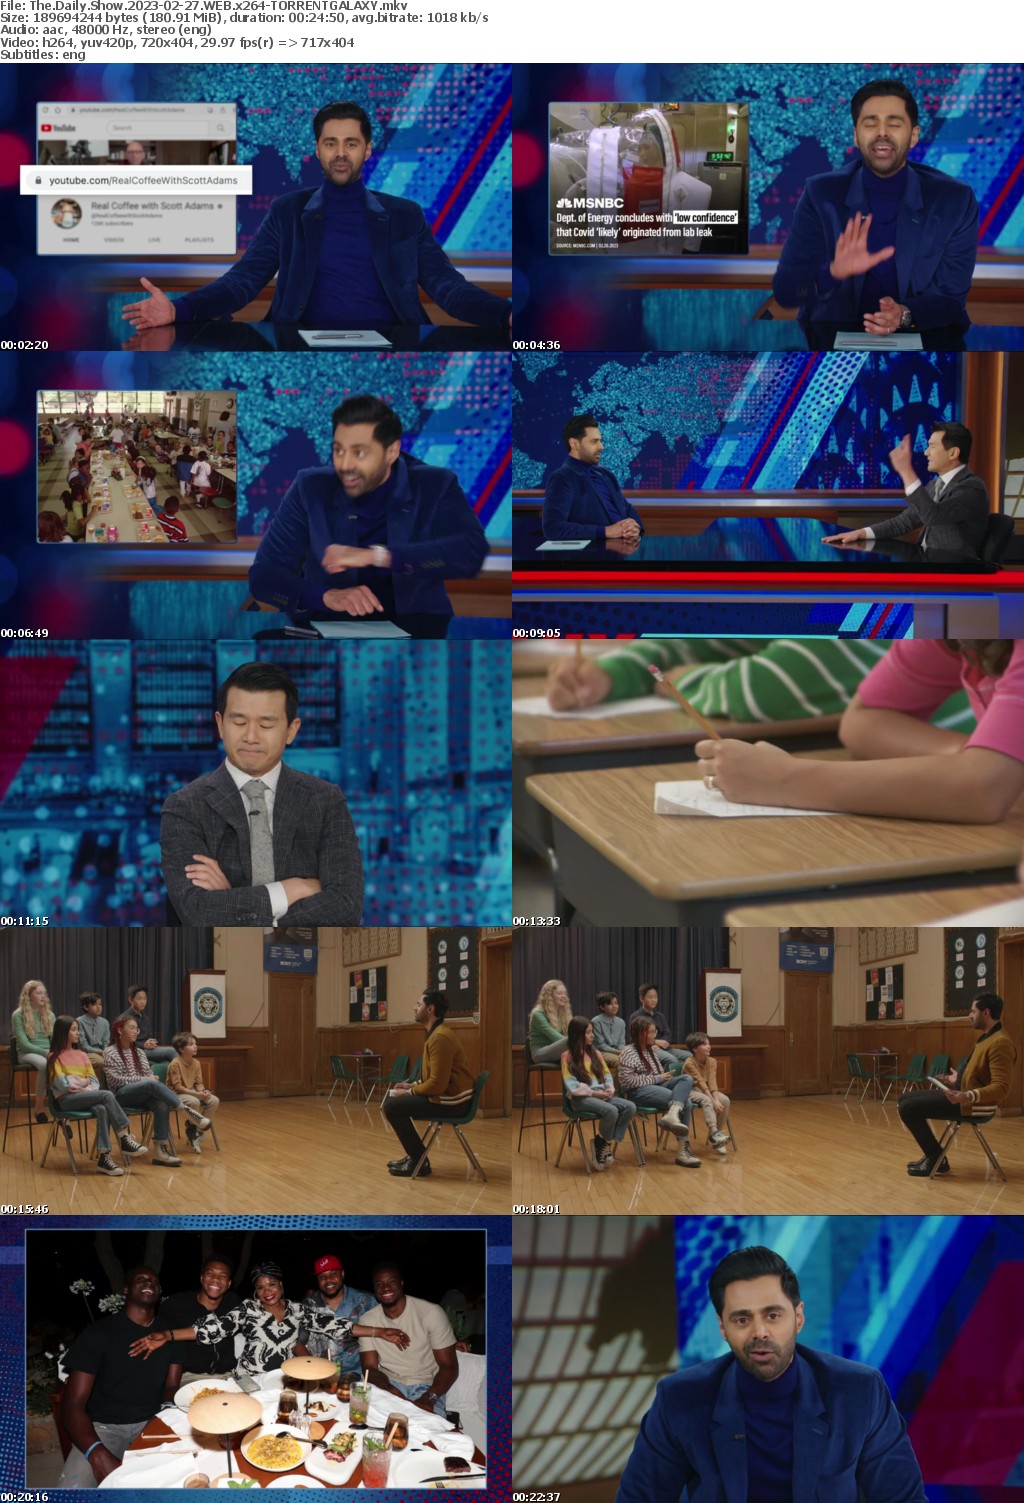 The Daily Show 2023-02-27 WEB x264-GALAXY